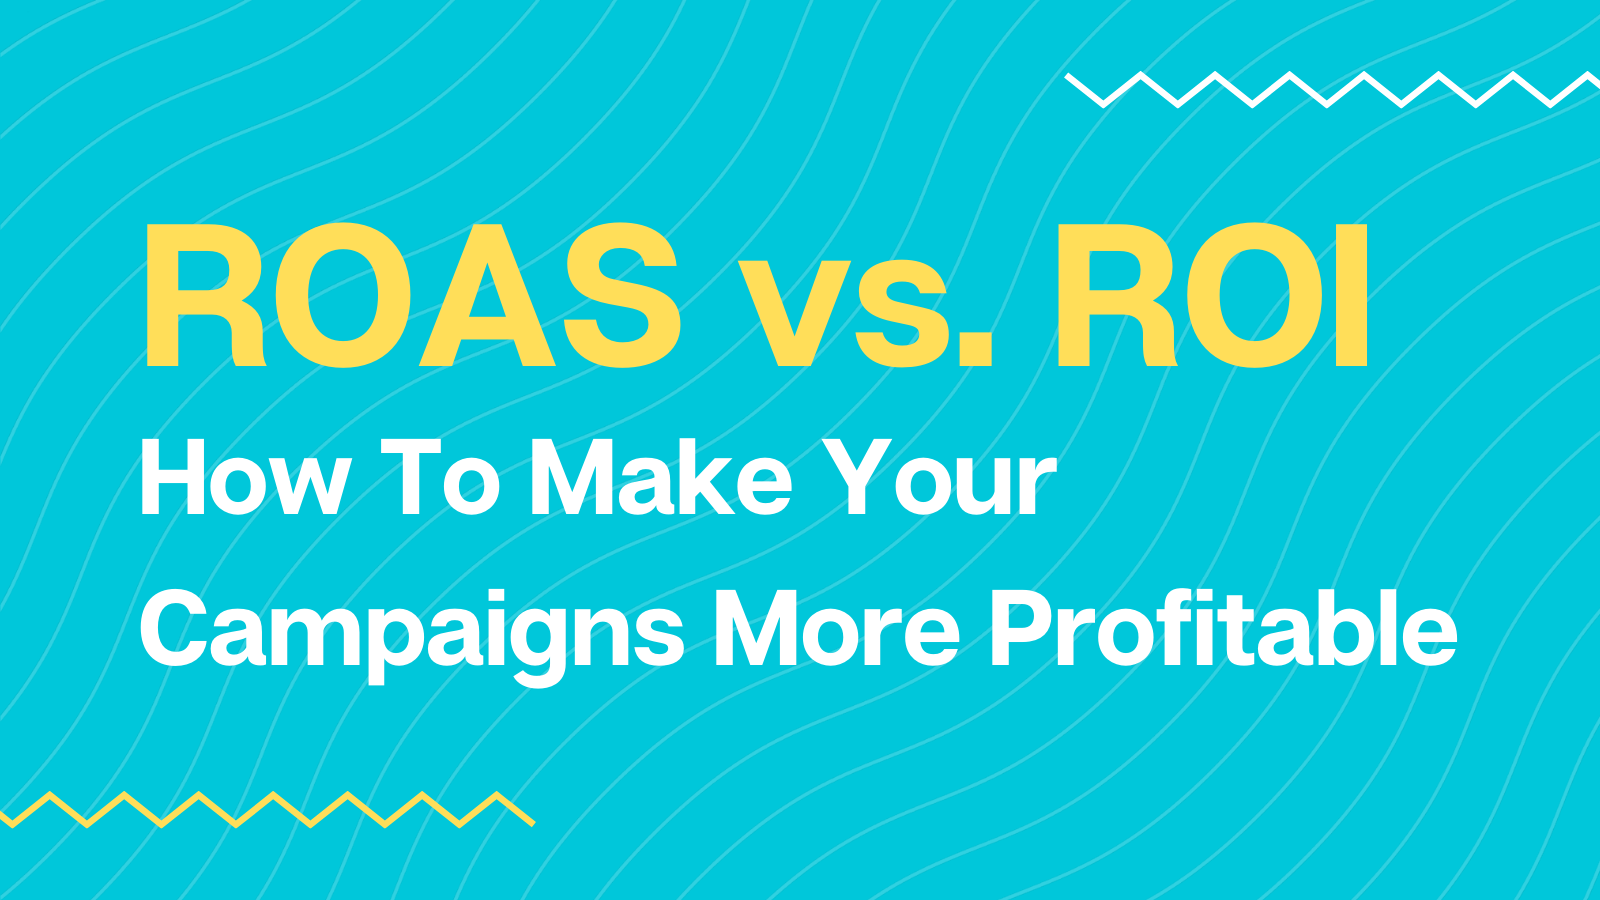 ROAS vs. ROI How To Make Your Campaigns For Profitable